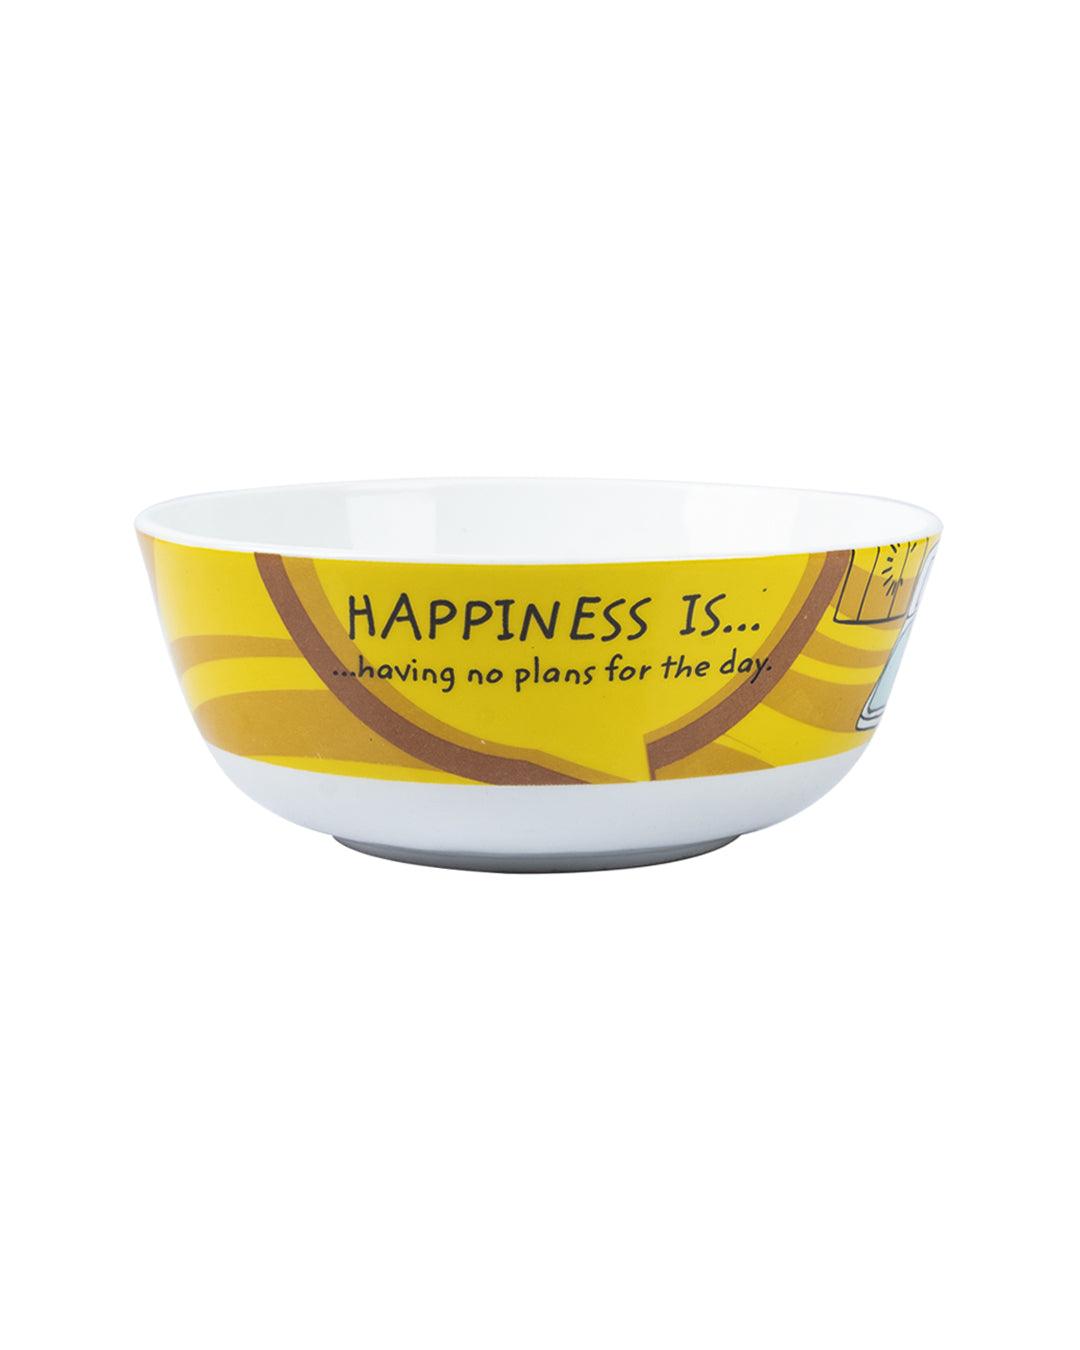 Market 99 - 'HAPPINESS IS … having no plans for the day' Graphic Print Serving Bowl Katoris In Ceramic (Set of 4, 340 mL) - MARKET 99